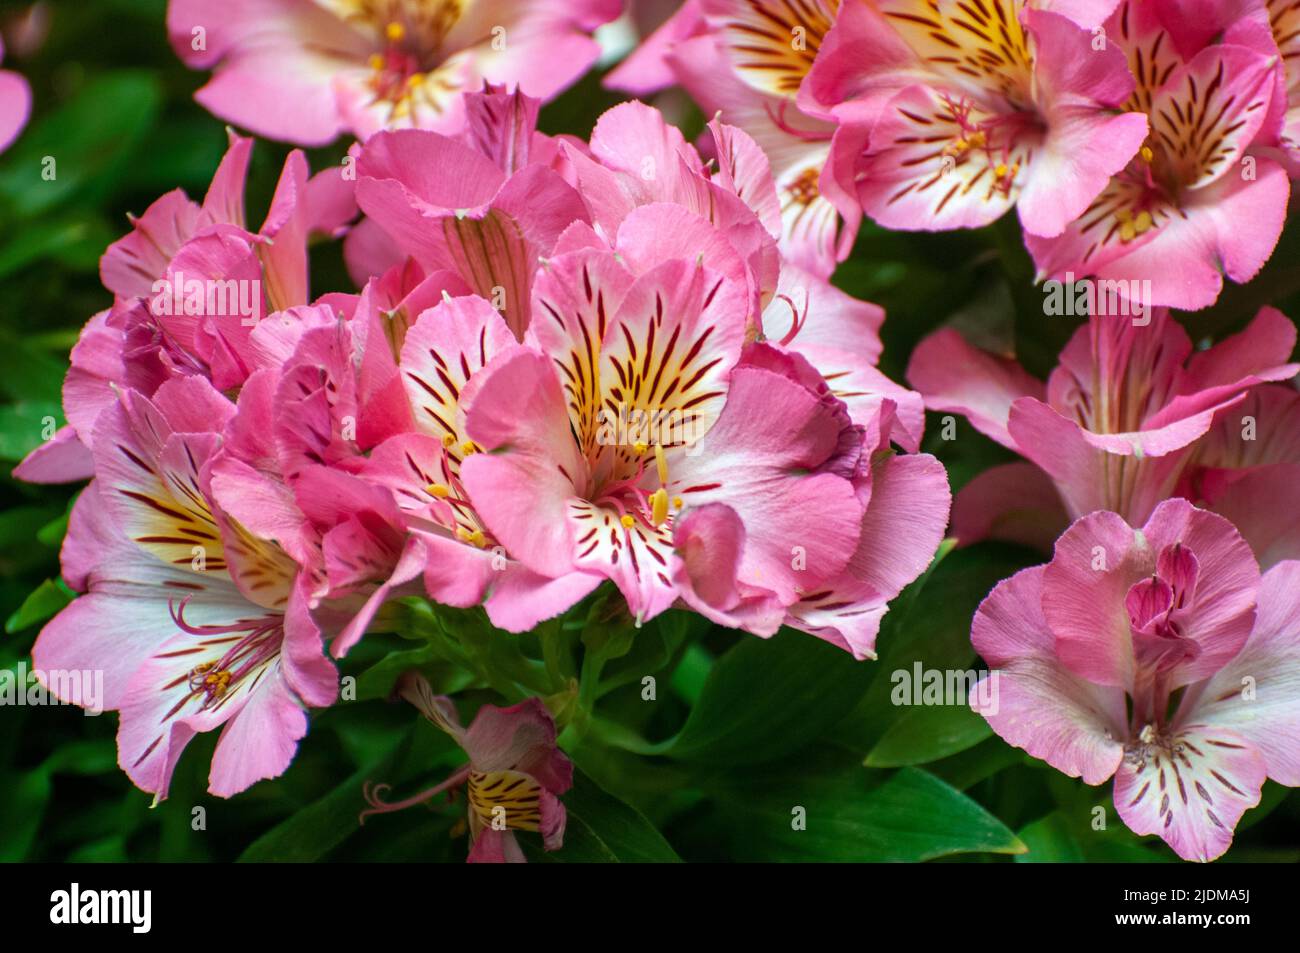 Pink Alstroemeria Cultivar commonly called the Peruvian lily or lily of the Incas, is a genus of flowering plants in the family Alstroemeriaceae. They Stock Photo